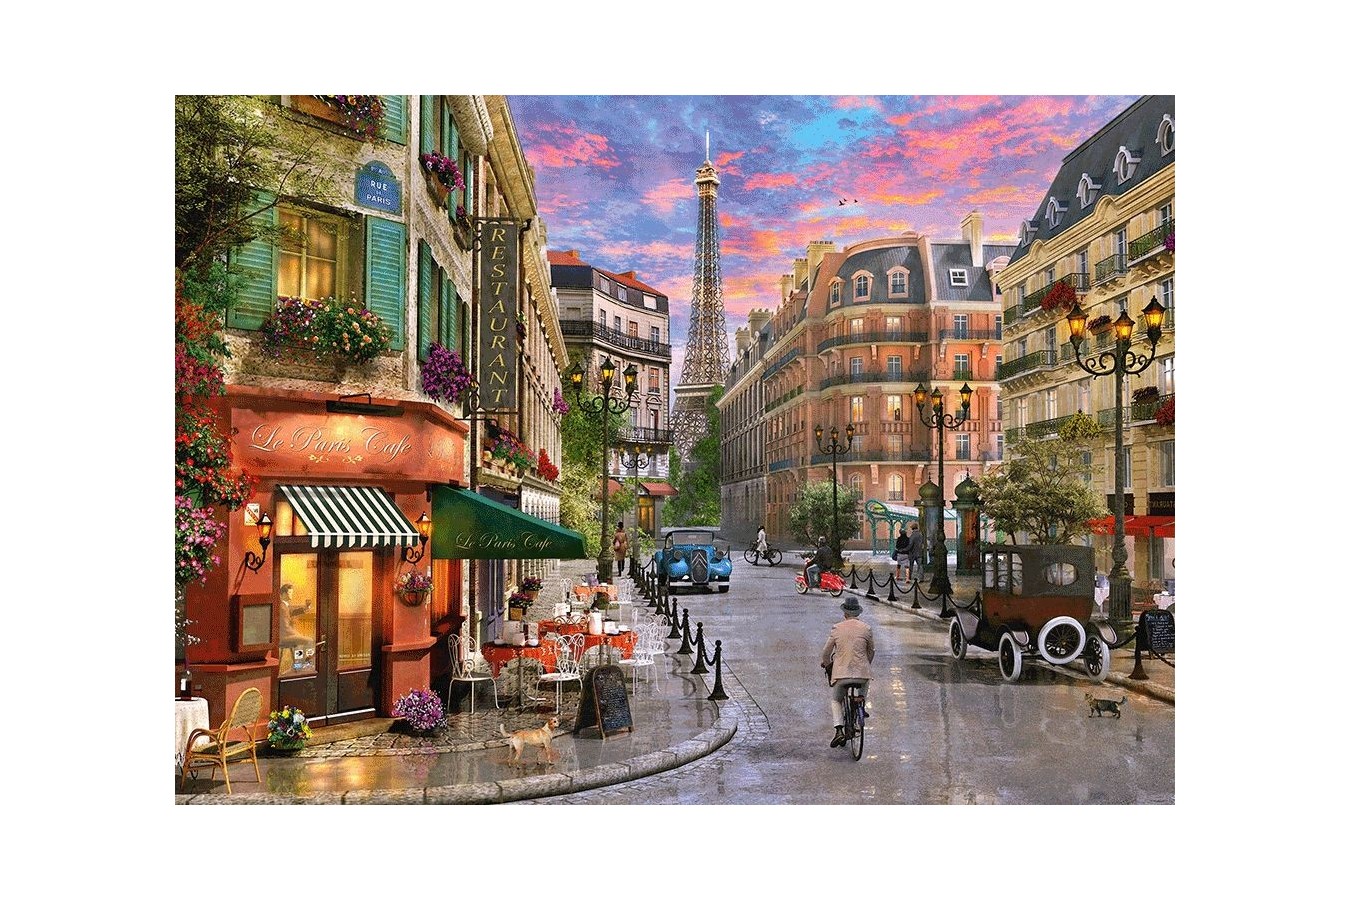 Puzzle Schmidt - Street To The Eiffel Tower, 1000 piese (58387)